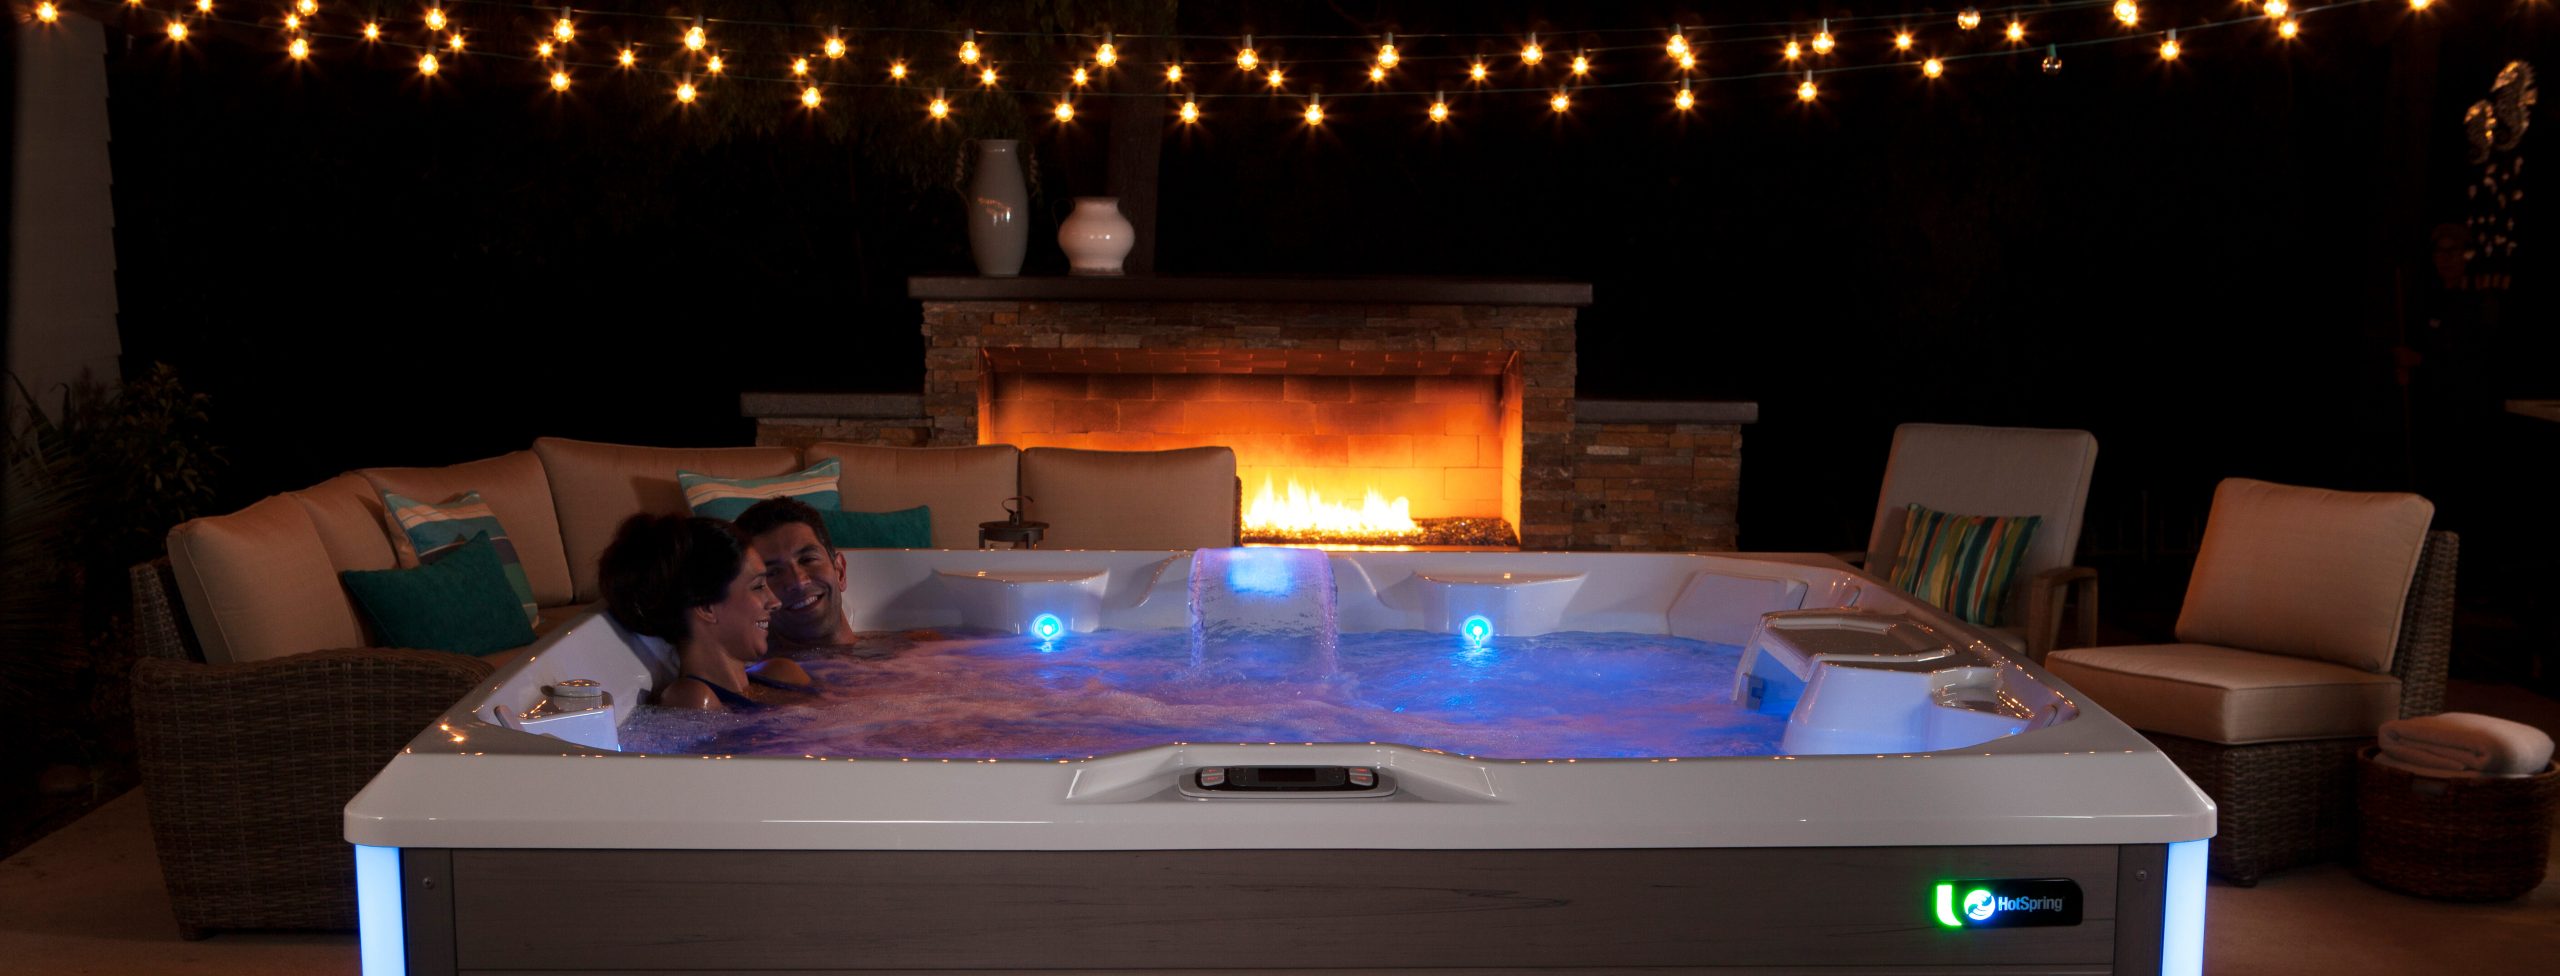 4 Tips for Your Next Hot Tub Date Night